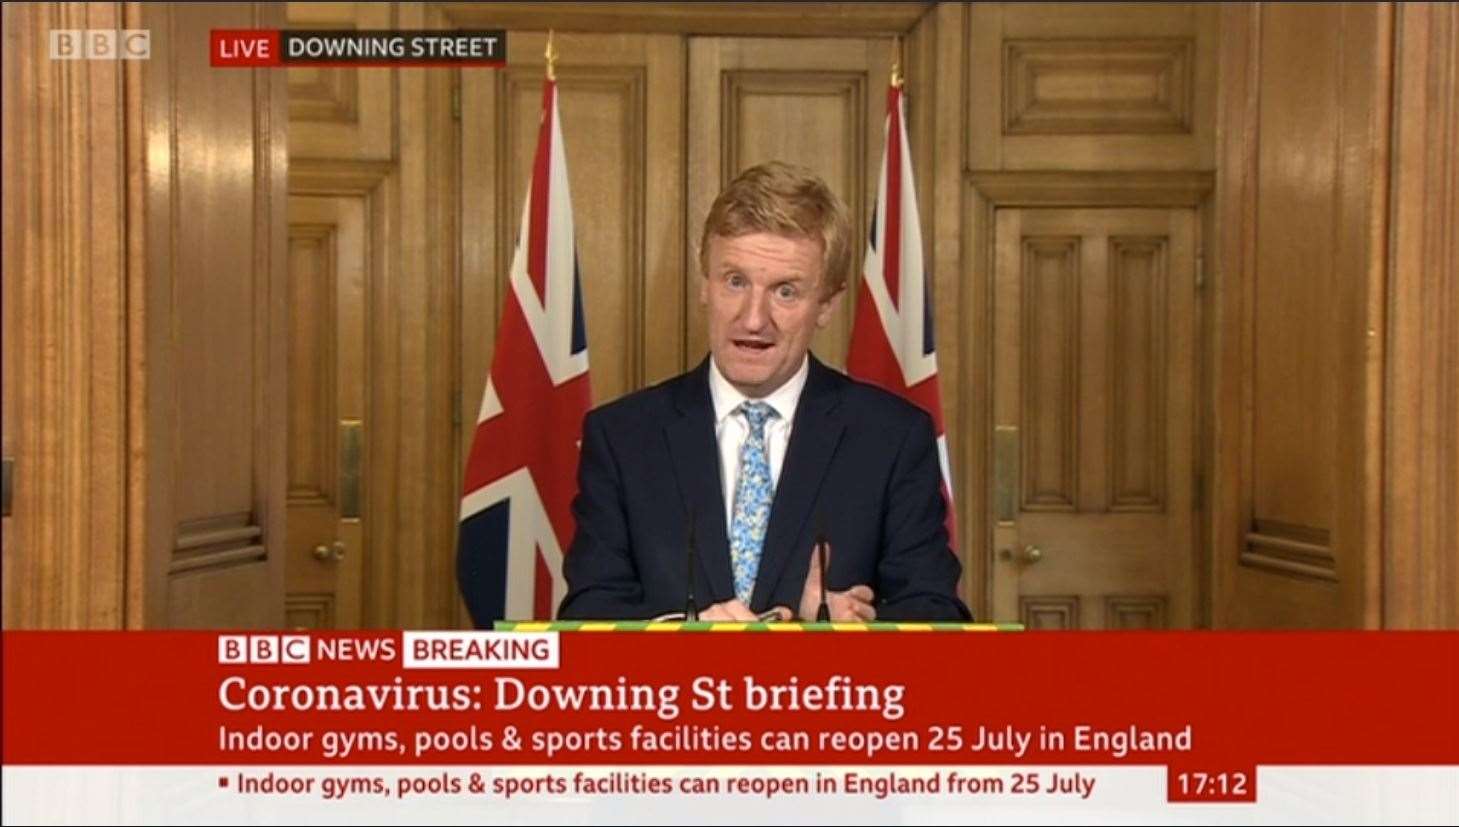 Oliver Dowden, the secretary of state for culture, media and sport takes a government press conference dealing with the unlocking of sports facilities